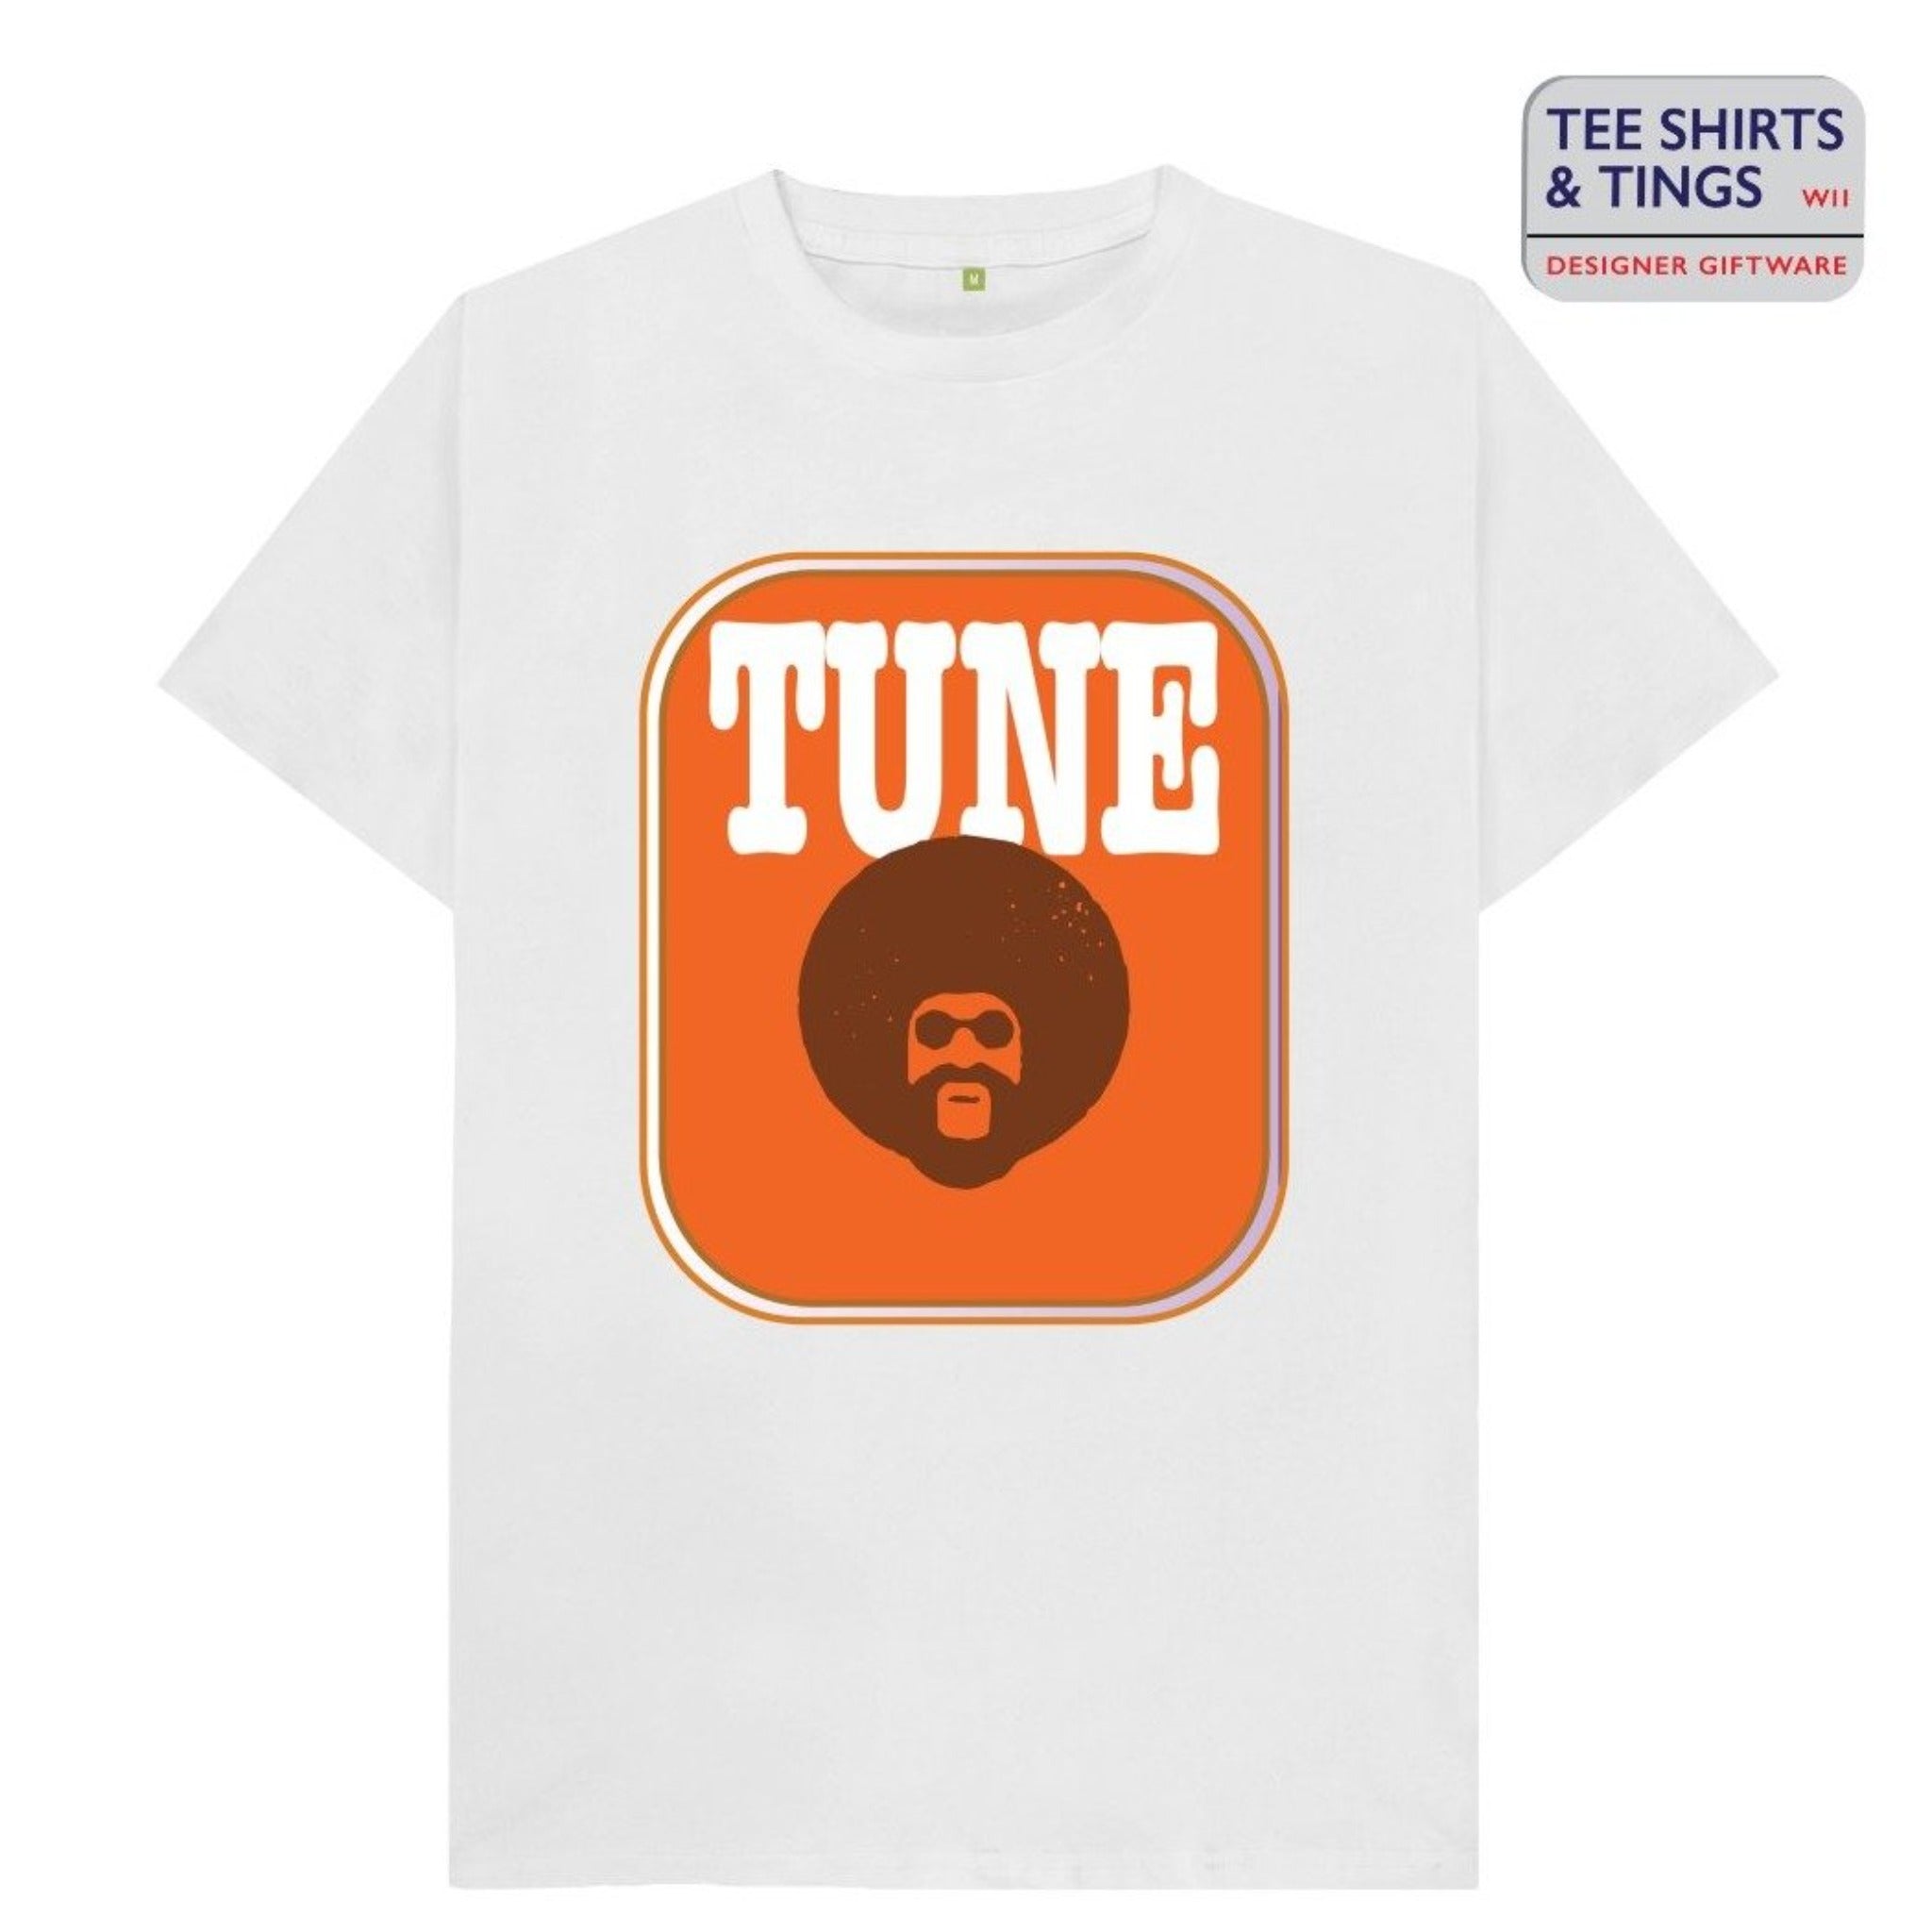 A white teeshirt with an amber rectangle on the front with an image of a man with afro hair and the wording in white saying TUNE. 100% organic cotton